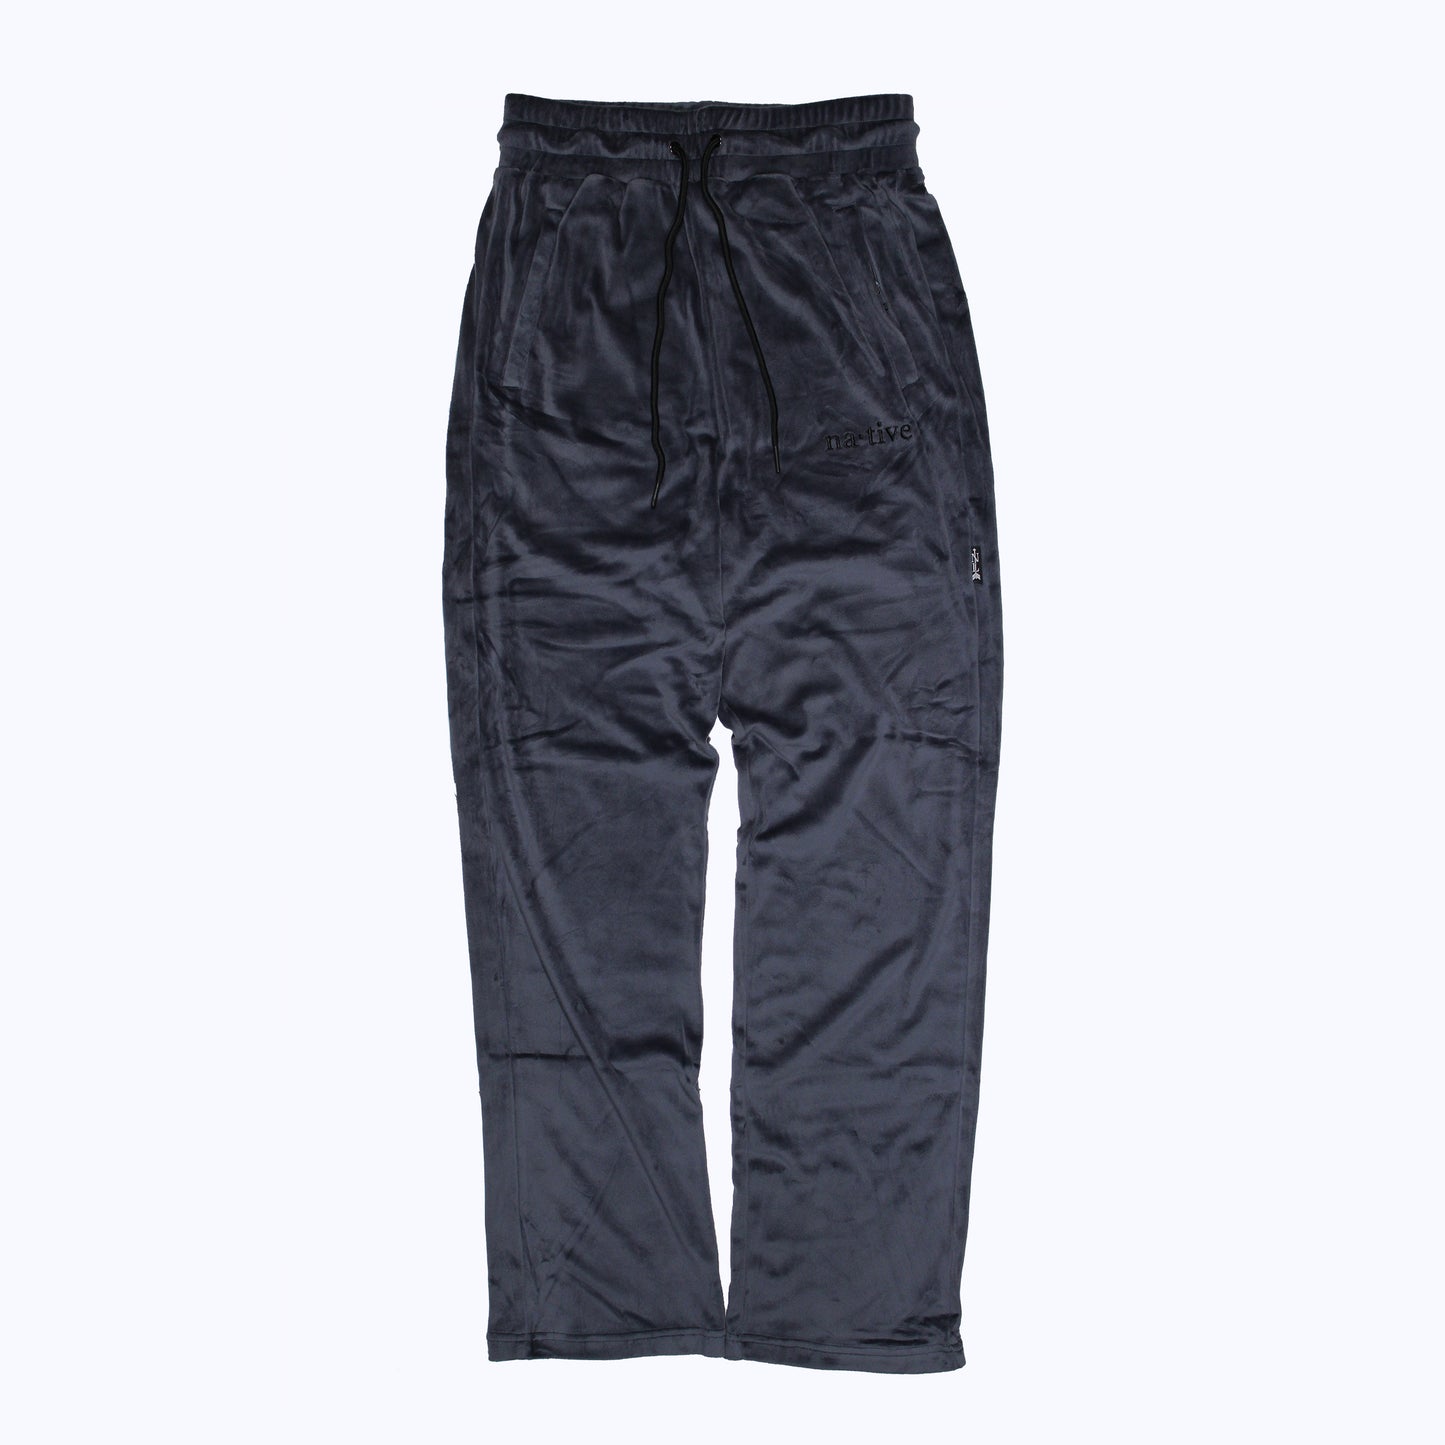 velour sweatpants in charcoal